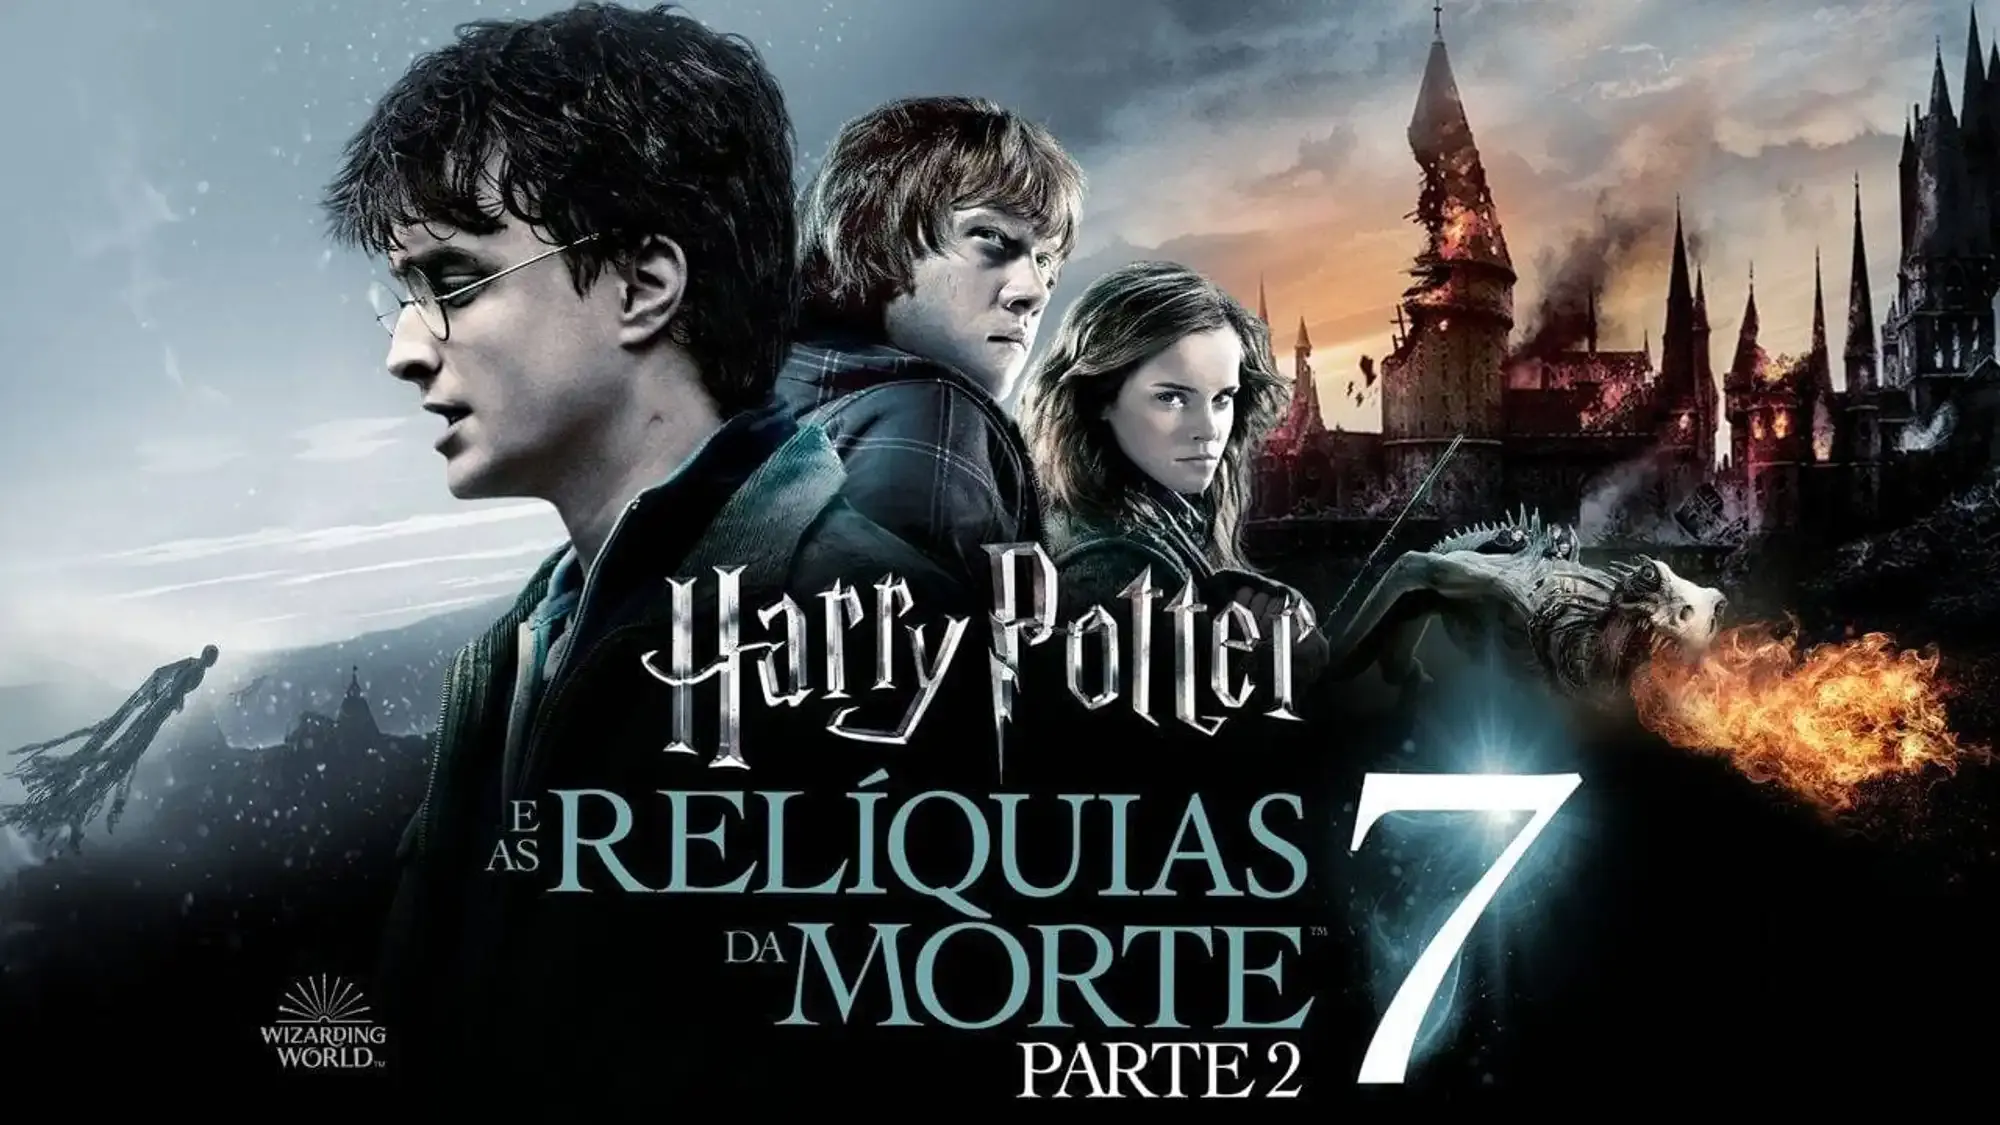 Harry Potter and the Deathly Hallows: Part 2 movie review